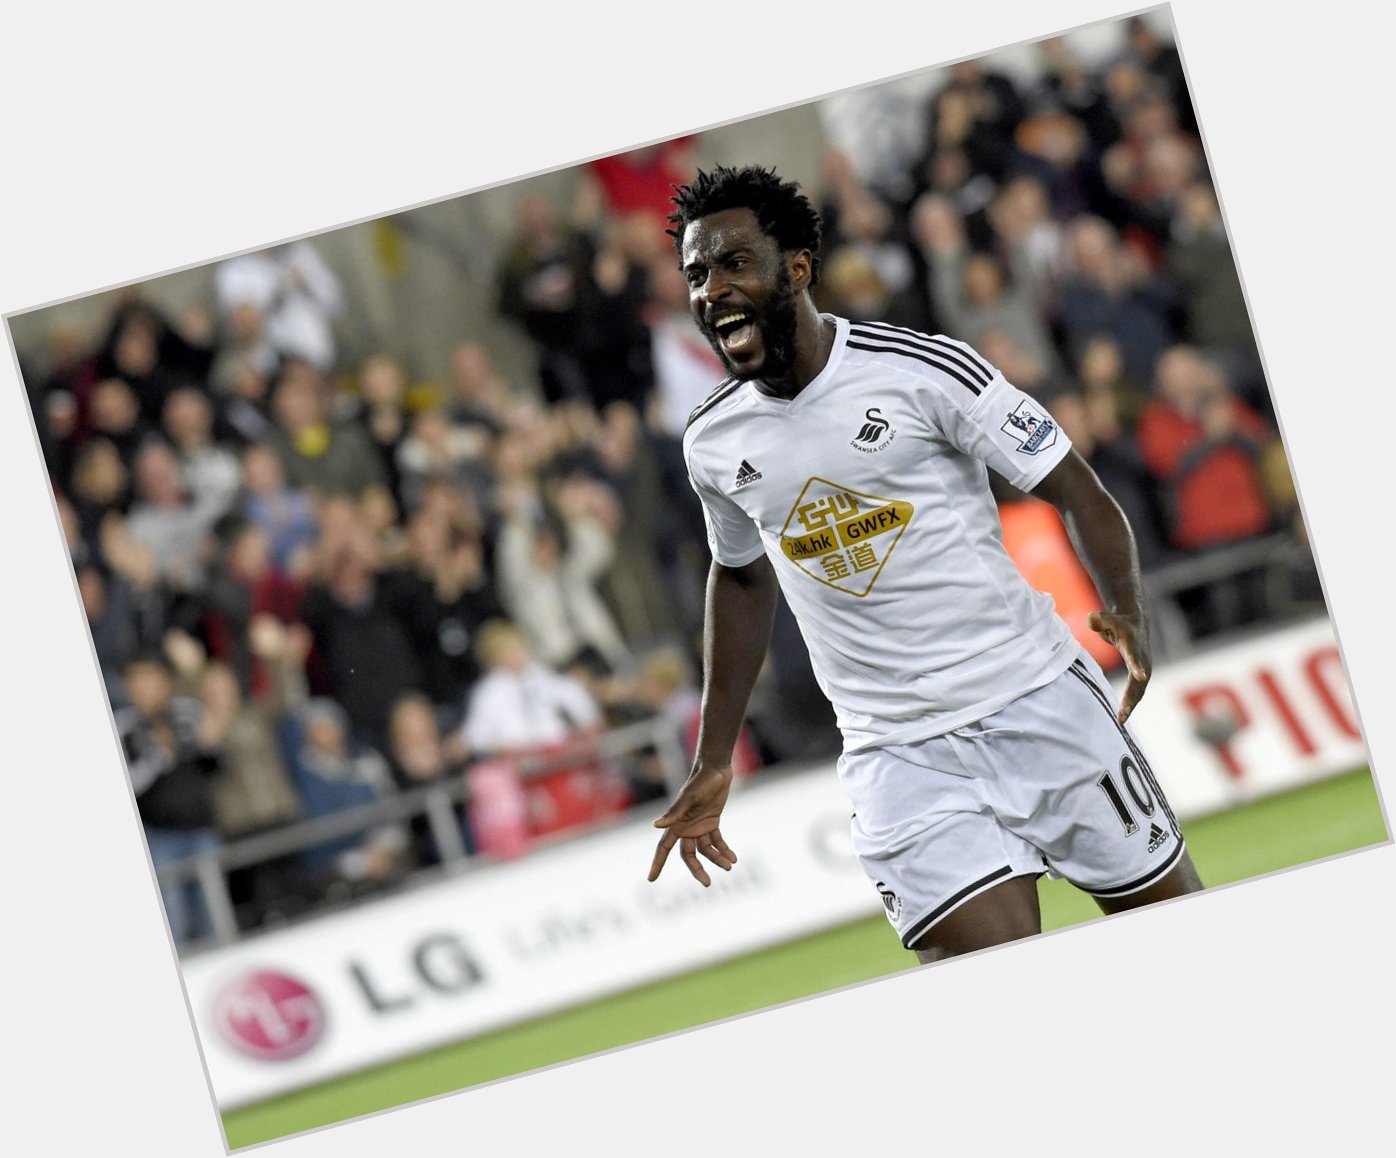 Happy 26th birthday to Wilfried Bony. No Premier League player has scored more goals in 2014 than him (19). 